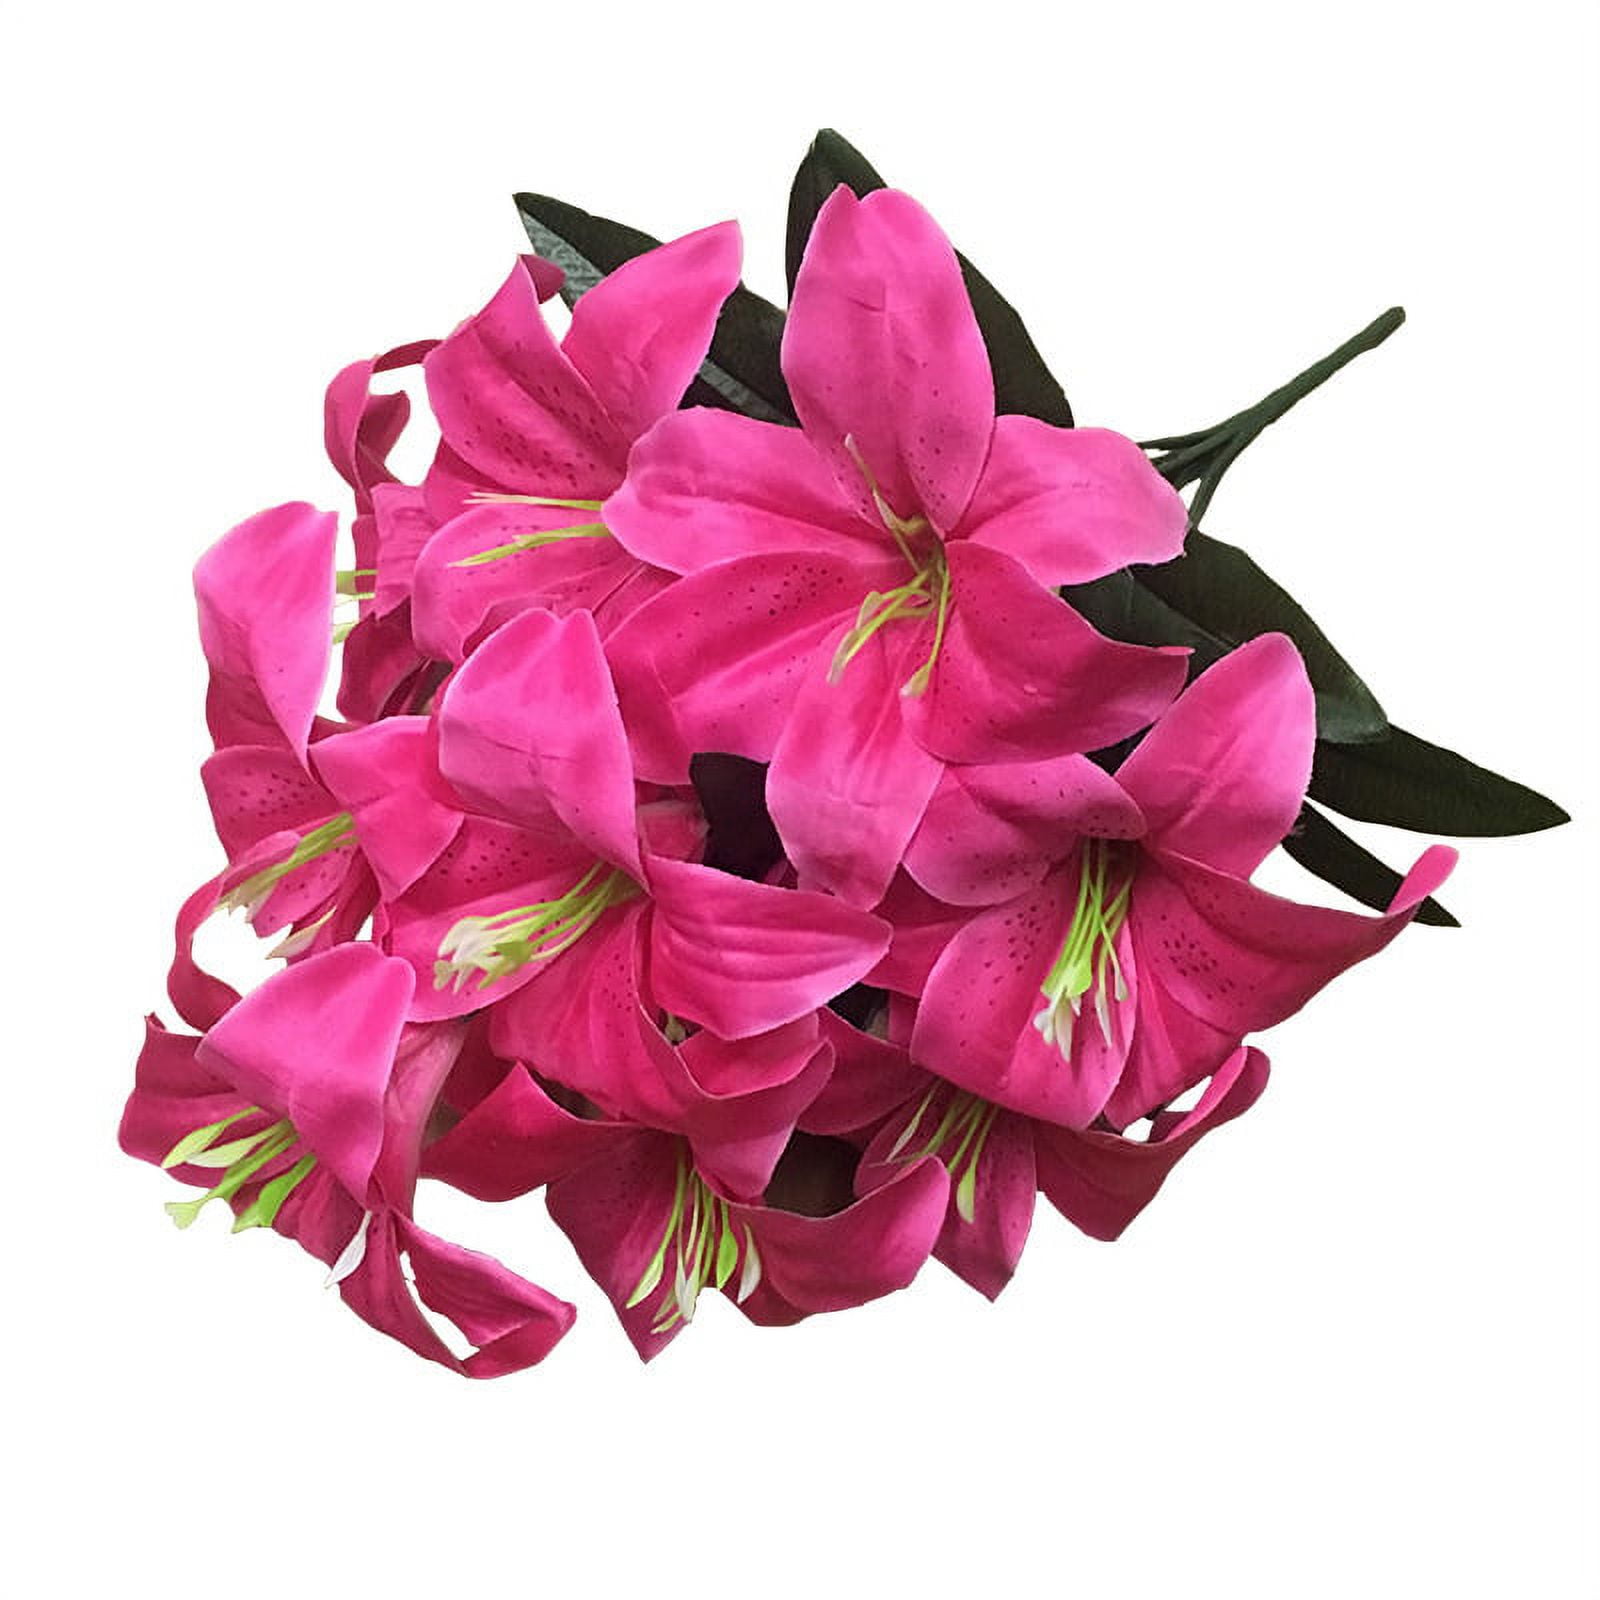  Aiouclay Artificial Flowers, DIY Flower Art Craft Kit, 33 Pcs  Butterfly Flower Bouquets with LED String Lights, Beginner Craft Kit,  Floral Gifts or Wedding Birthday Party(Pink) : Home & Kitchen